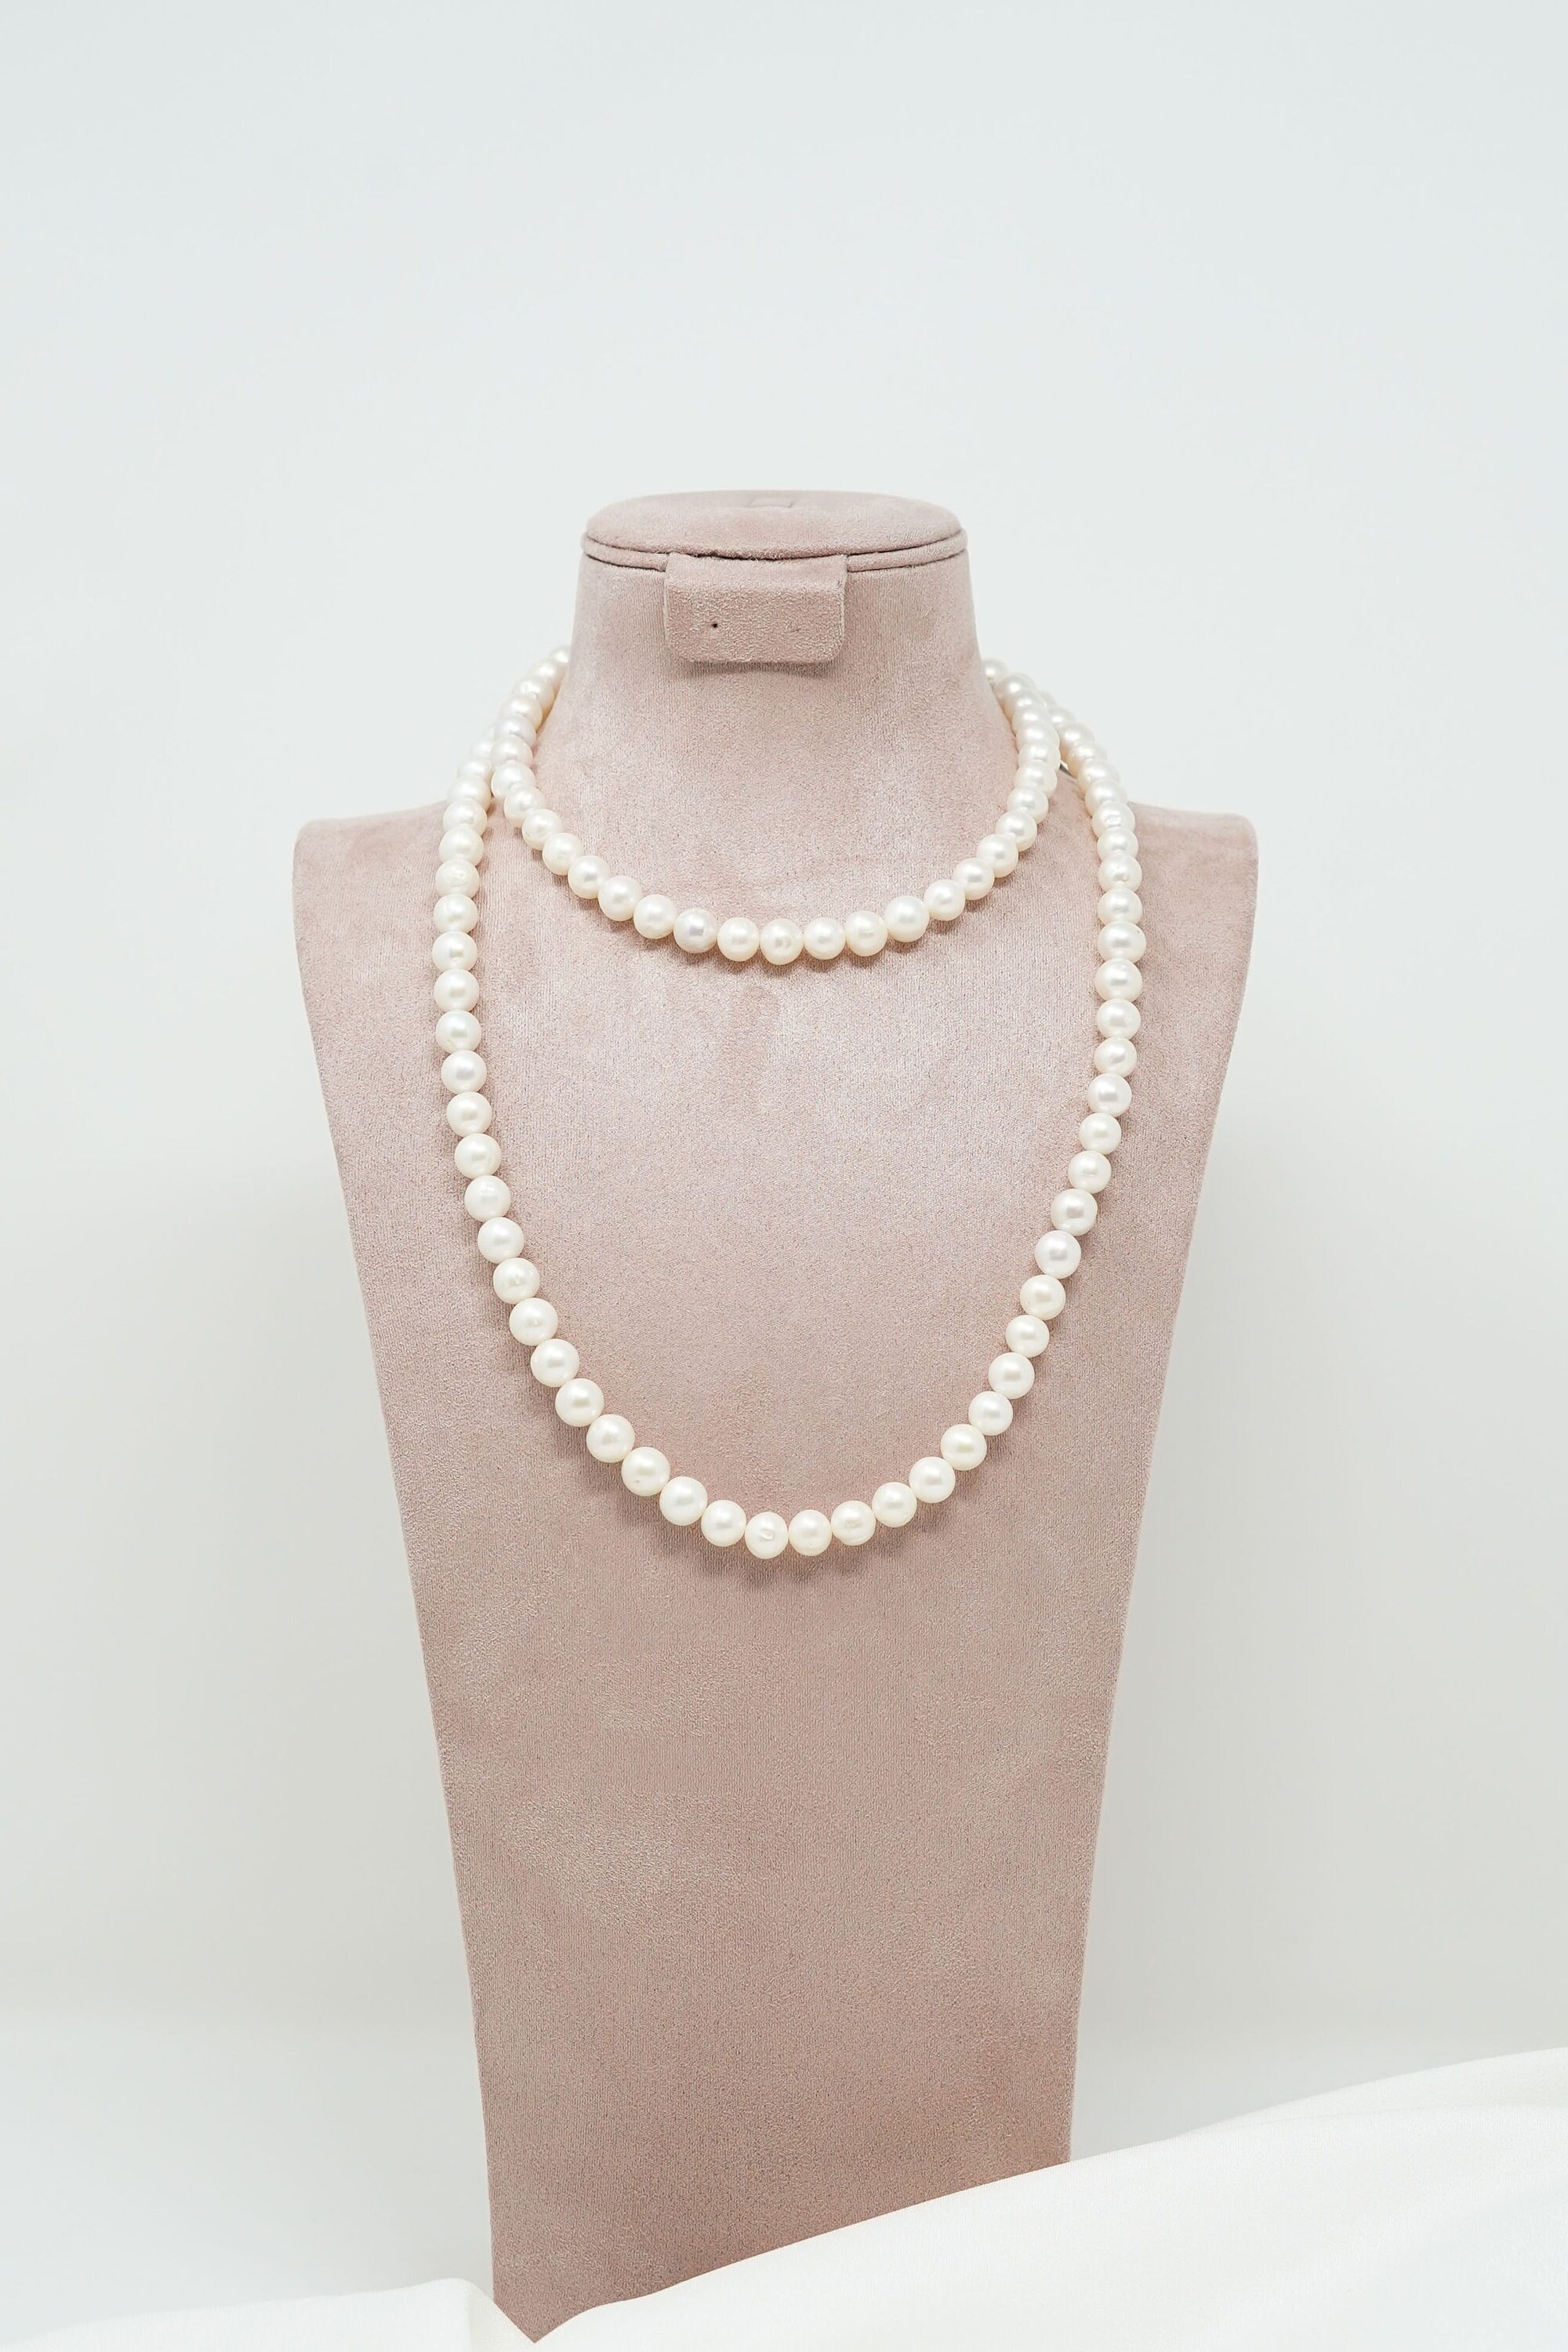 30 Inch Freshwater Pearls Necklace Inspired by Carrie Bradshaw Sex and the  City - Etsy